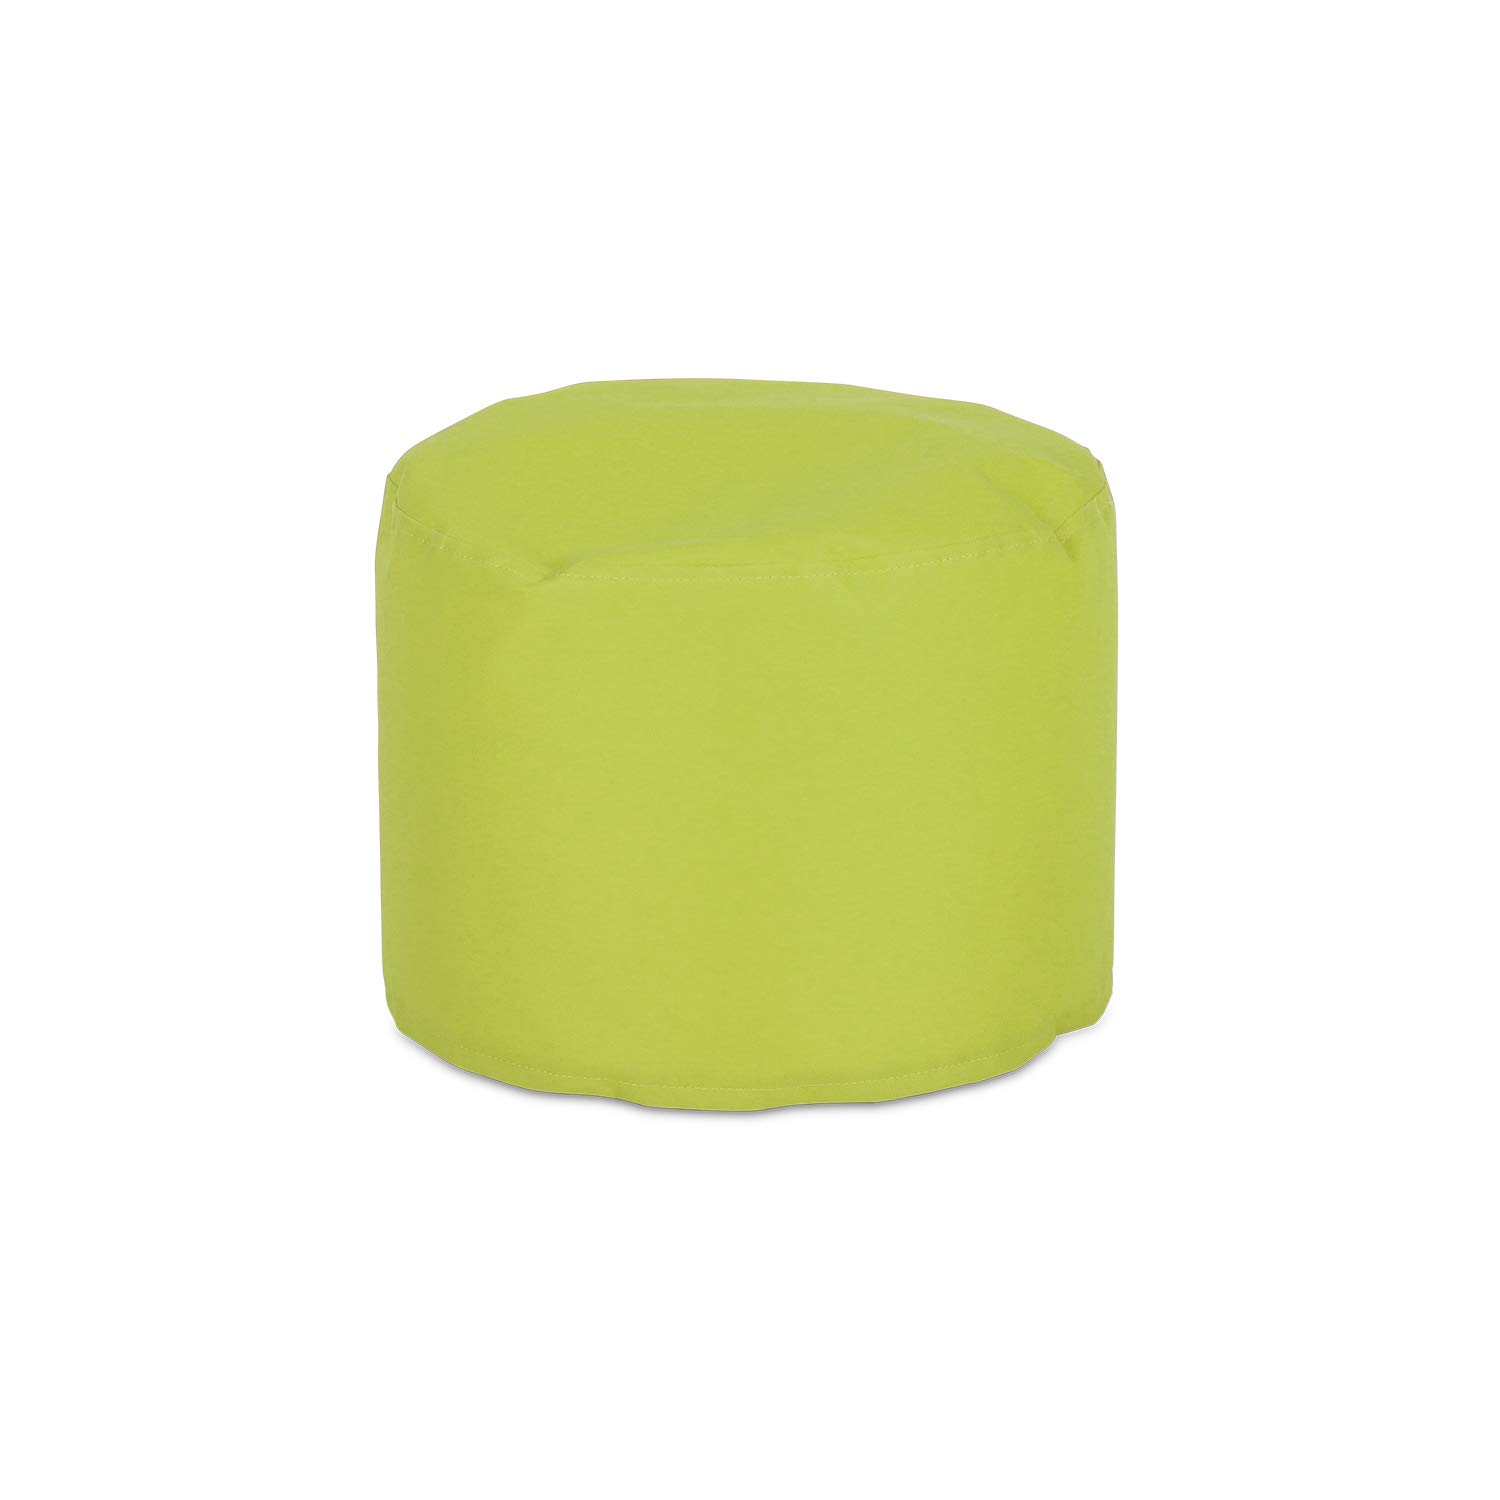 Knorr-Baby 440104 Stool Round M Colour Green